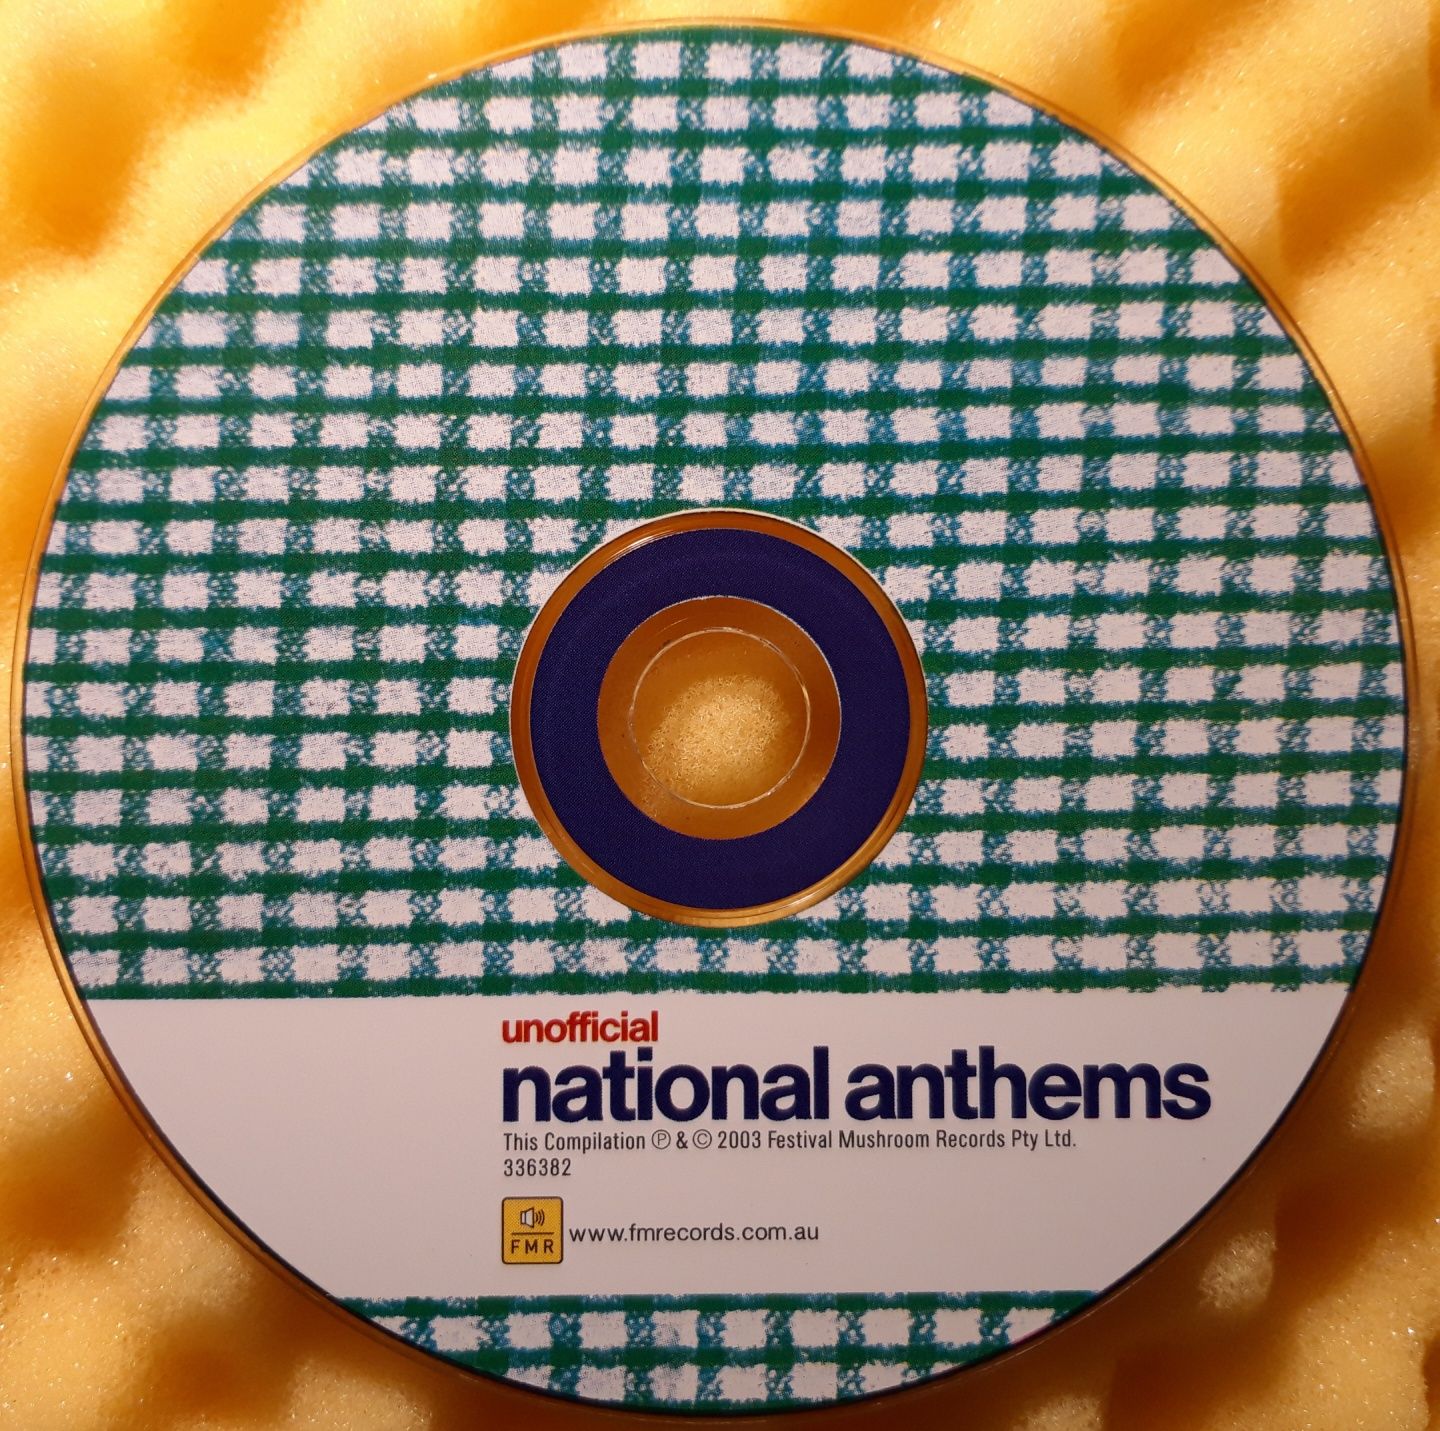 Unofficial National Anthems (CD, 2003)